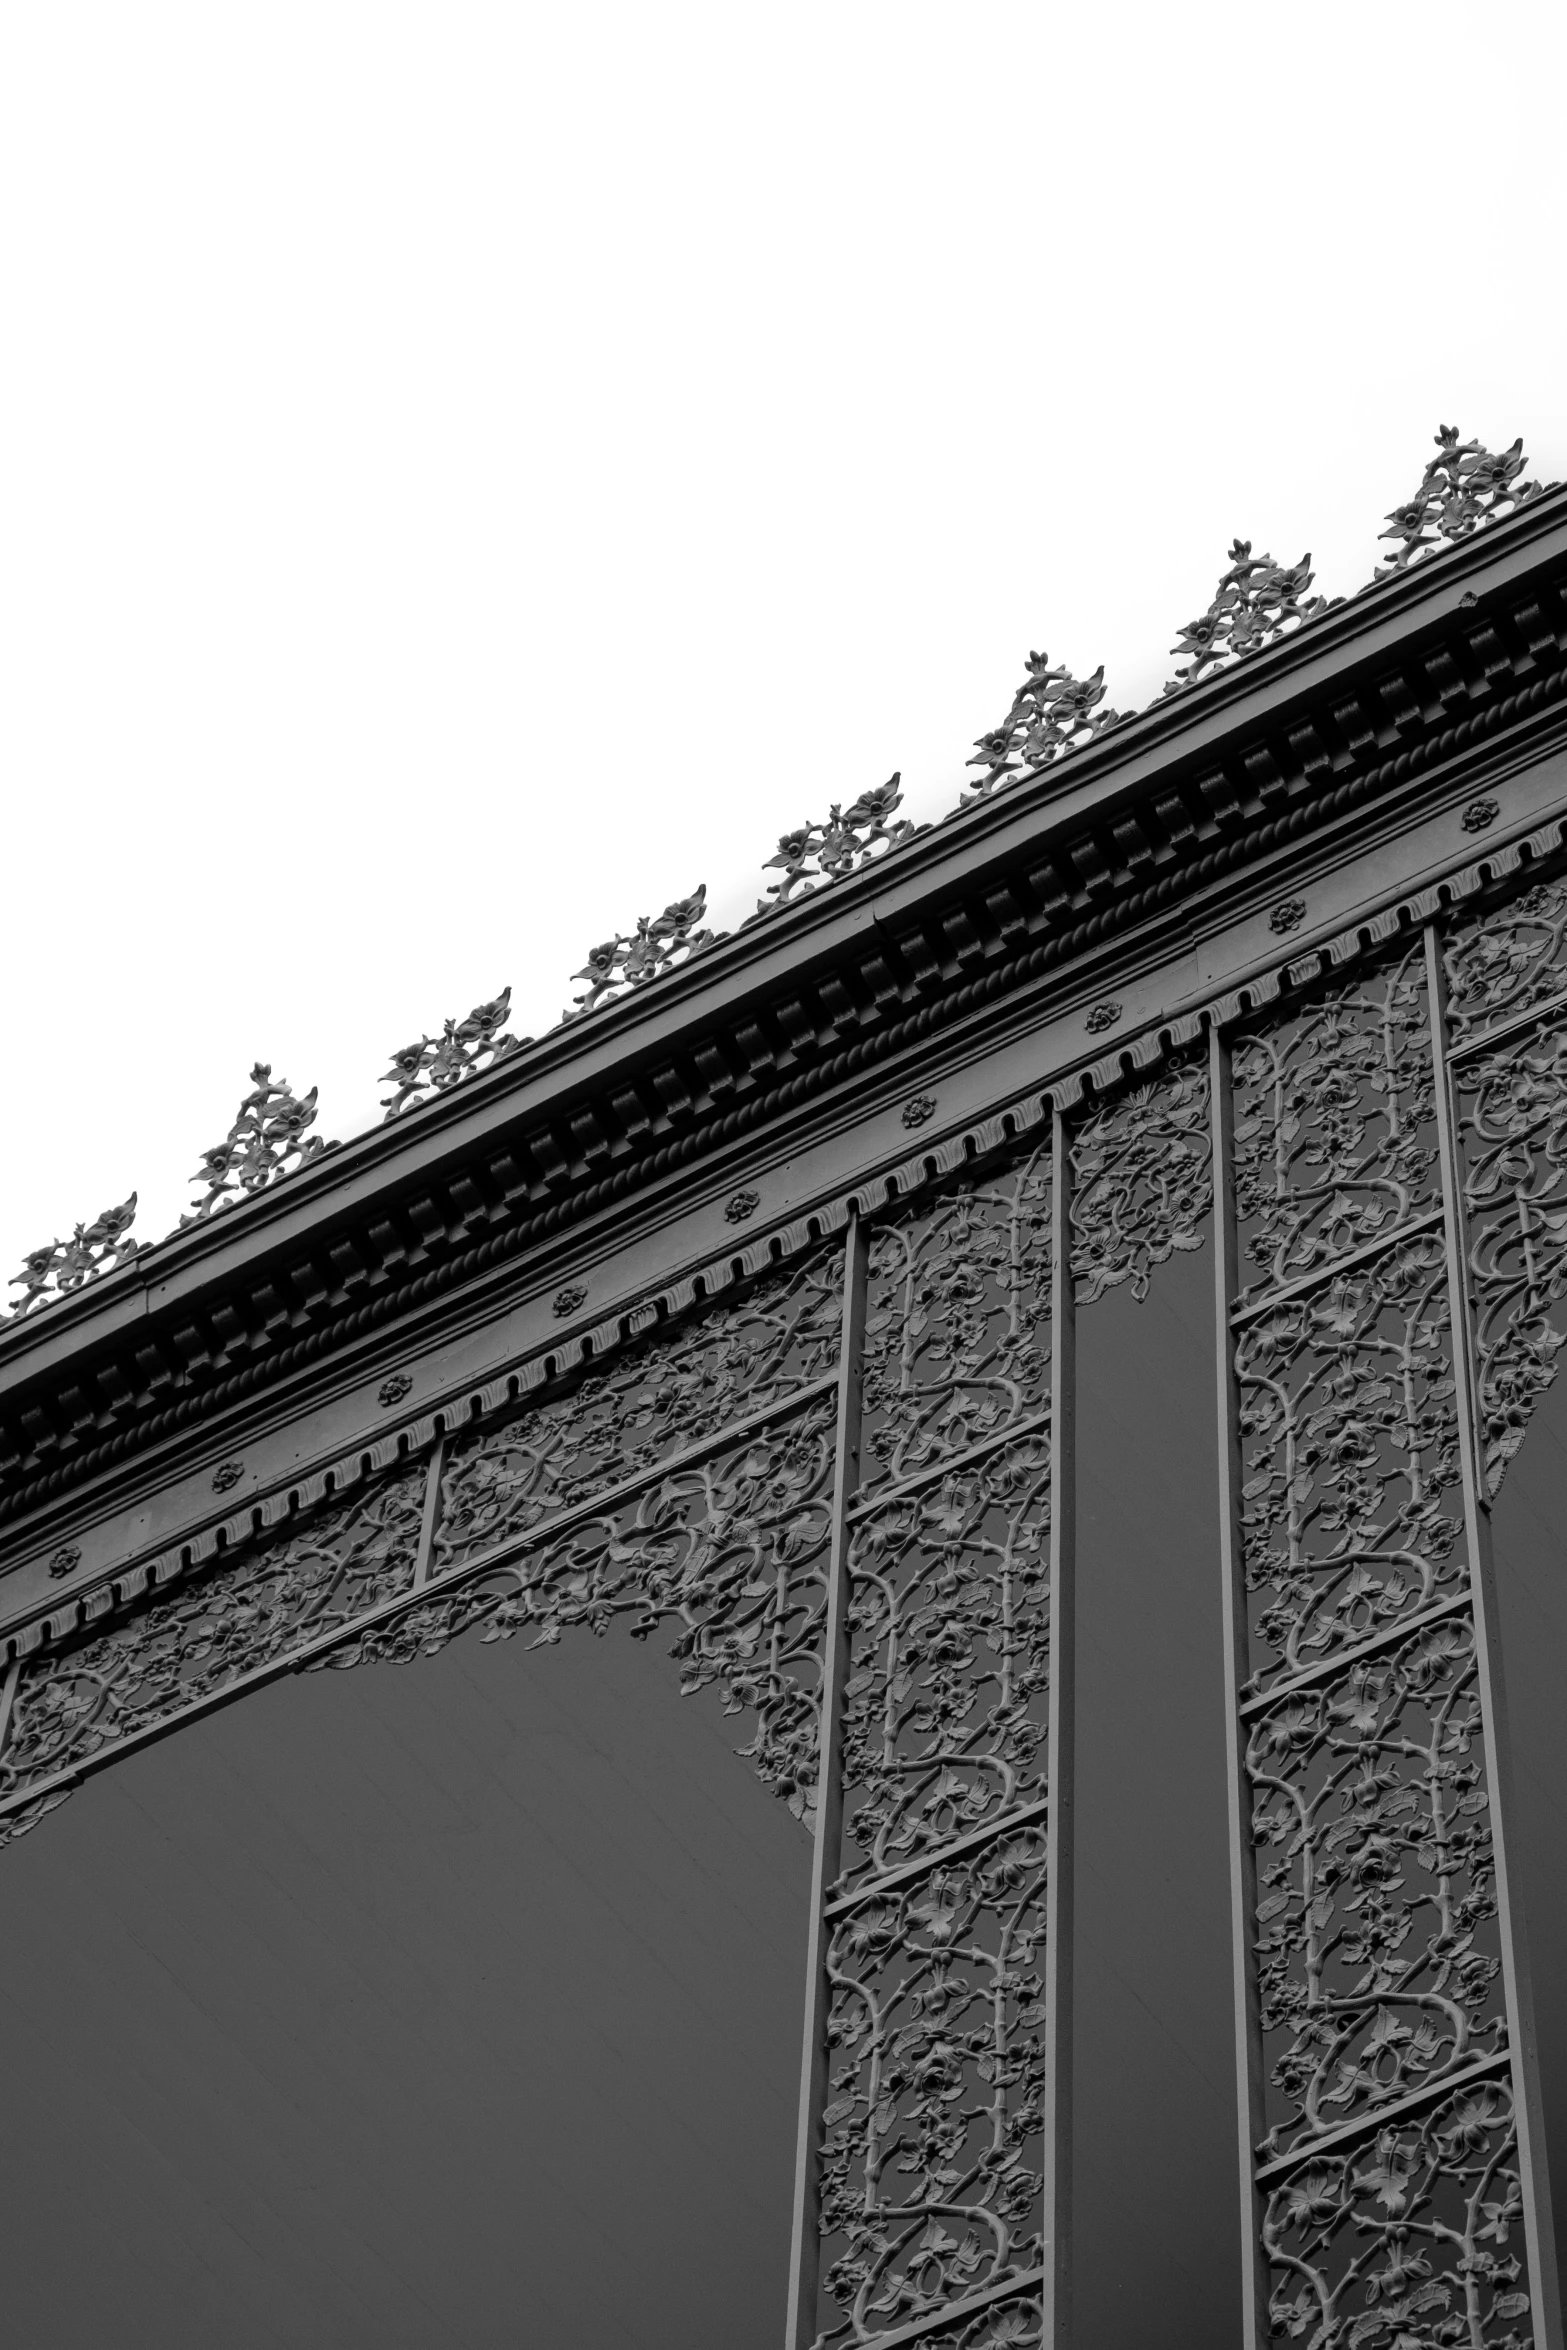 a black and white po of the top part of an oriental building